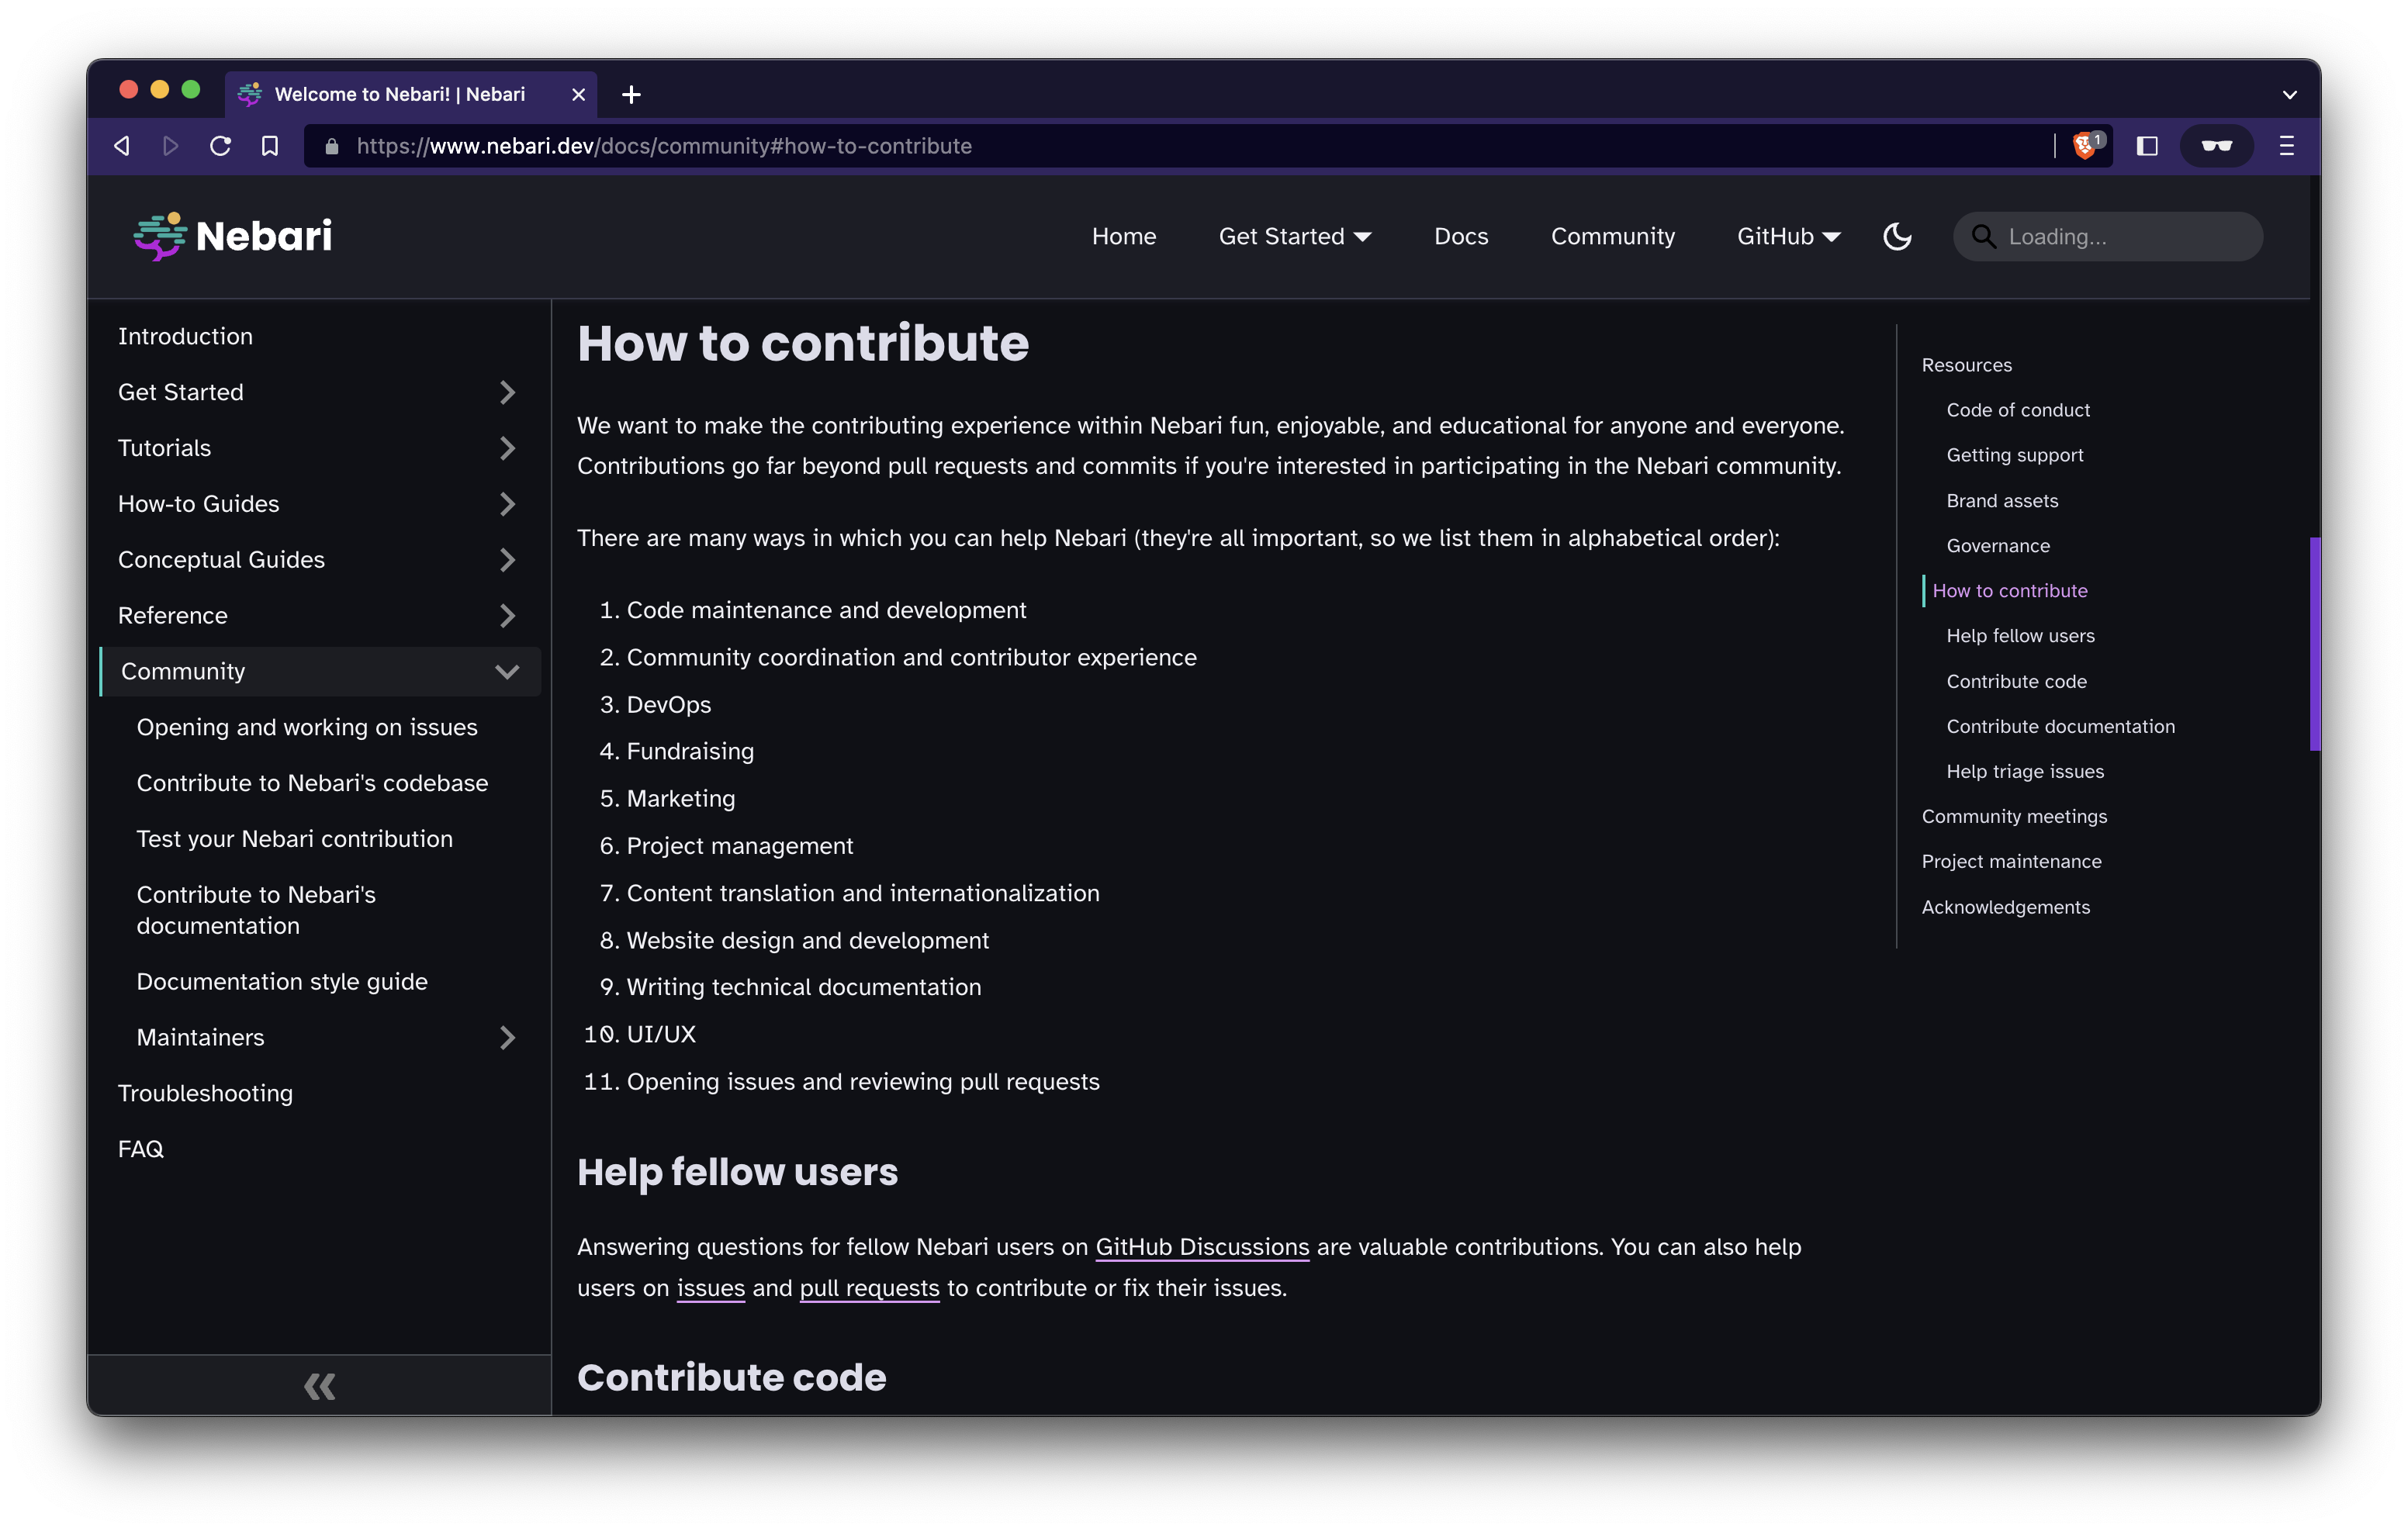 A browser window showing Nebari documentation's "Community" page open to the "How to contribute" section. It highlights the different ways to contribute including code maintenance, community coordination, website design, UI/UX, technical documentation, and much more!